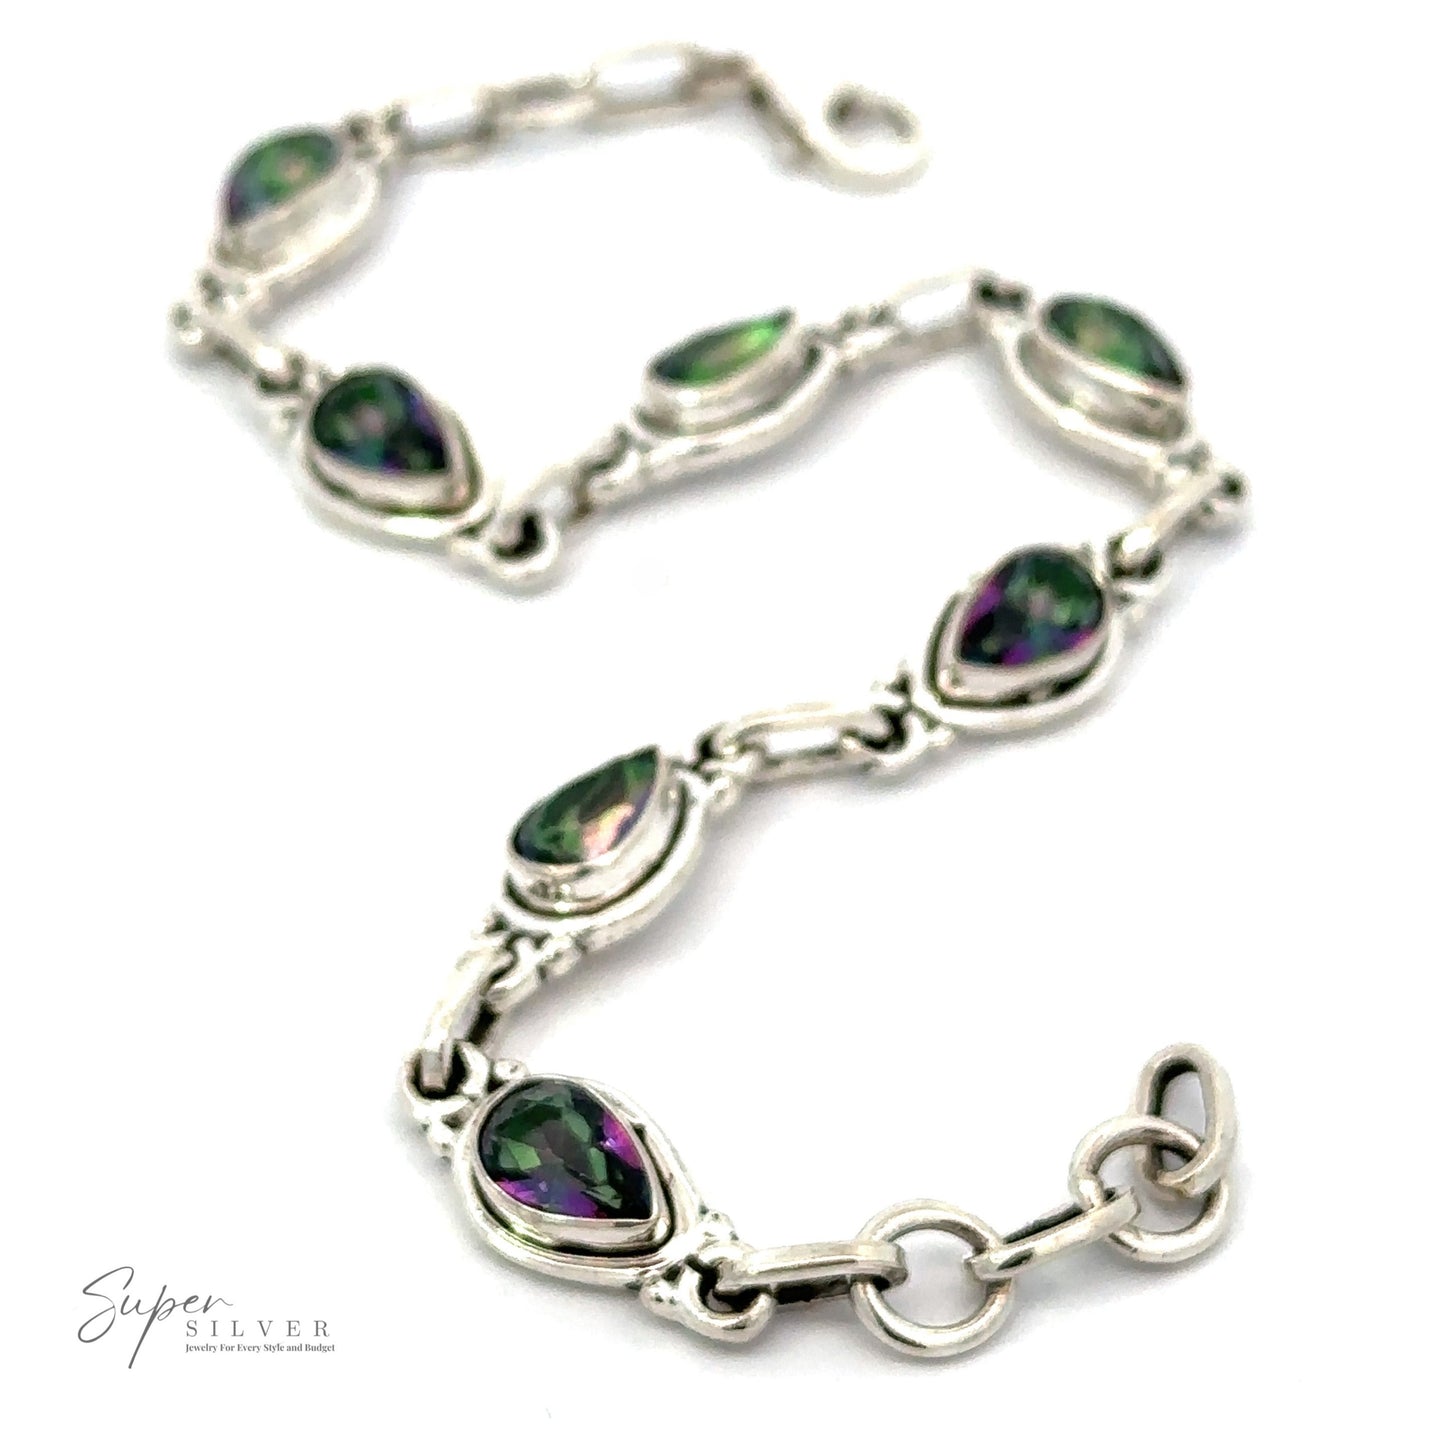 
                  
                    A Rainbow Topaz Bordered Teardrop Bracelet with green and purple teardrop-shaped gemstones, featuring a simple clasp, and the Super Silver logo in the bottom left corner.
                  
                